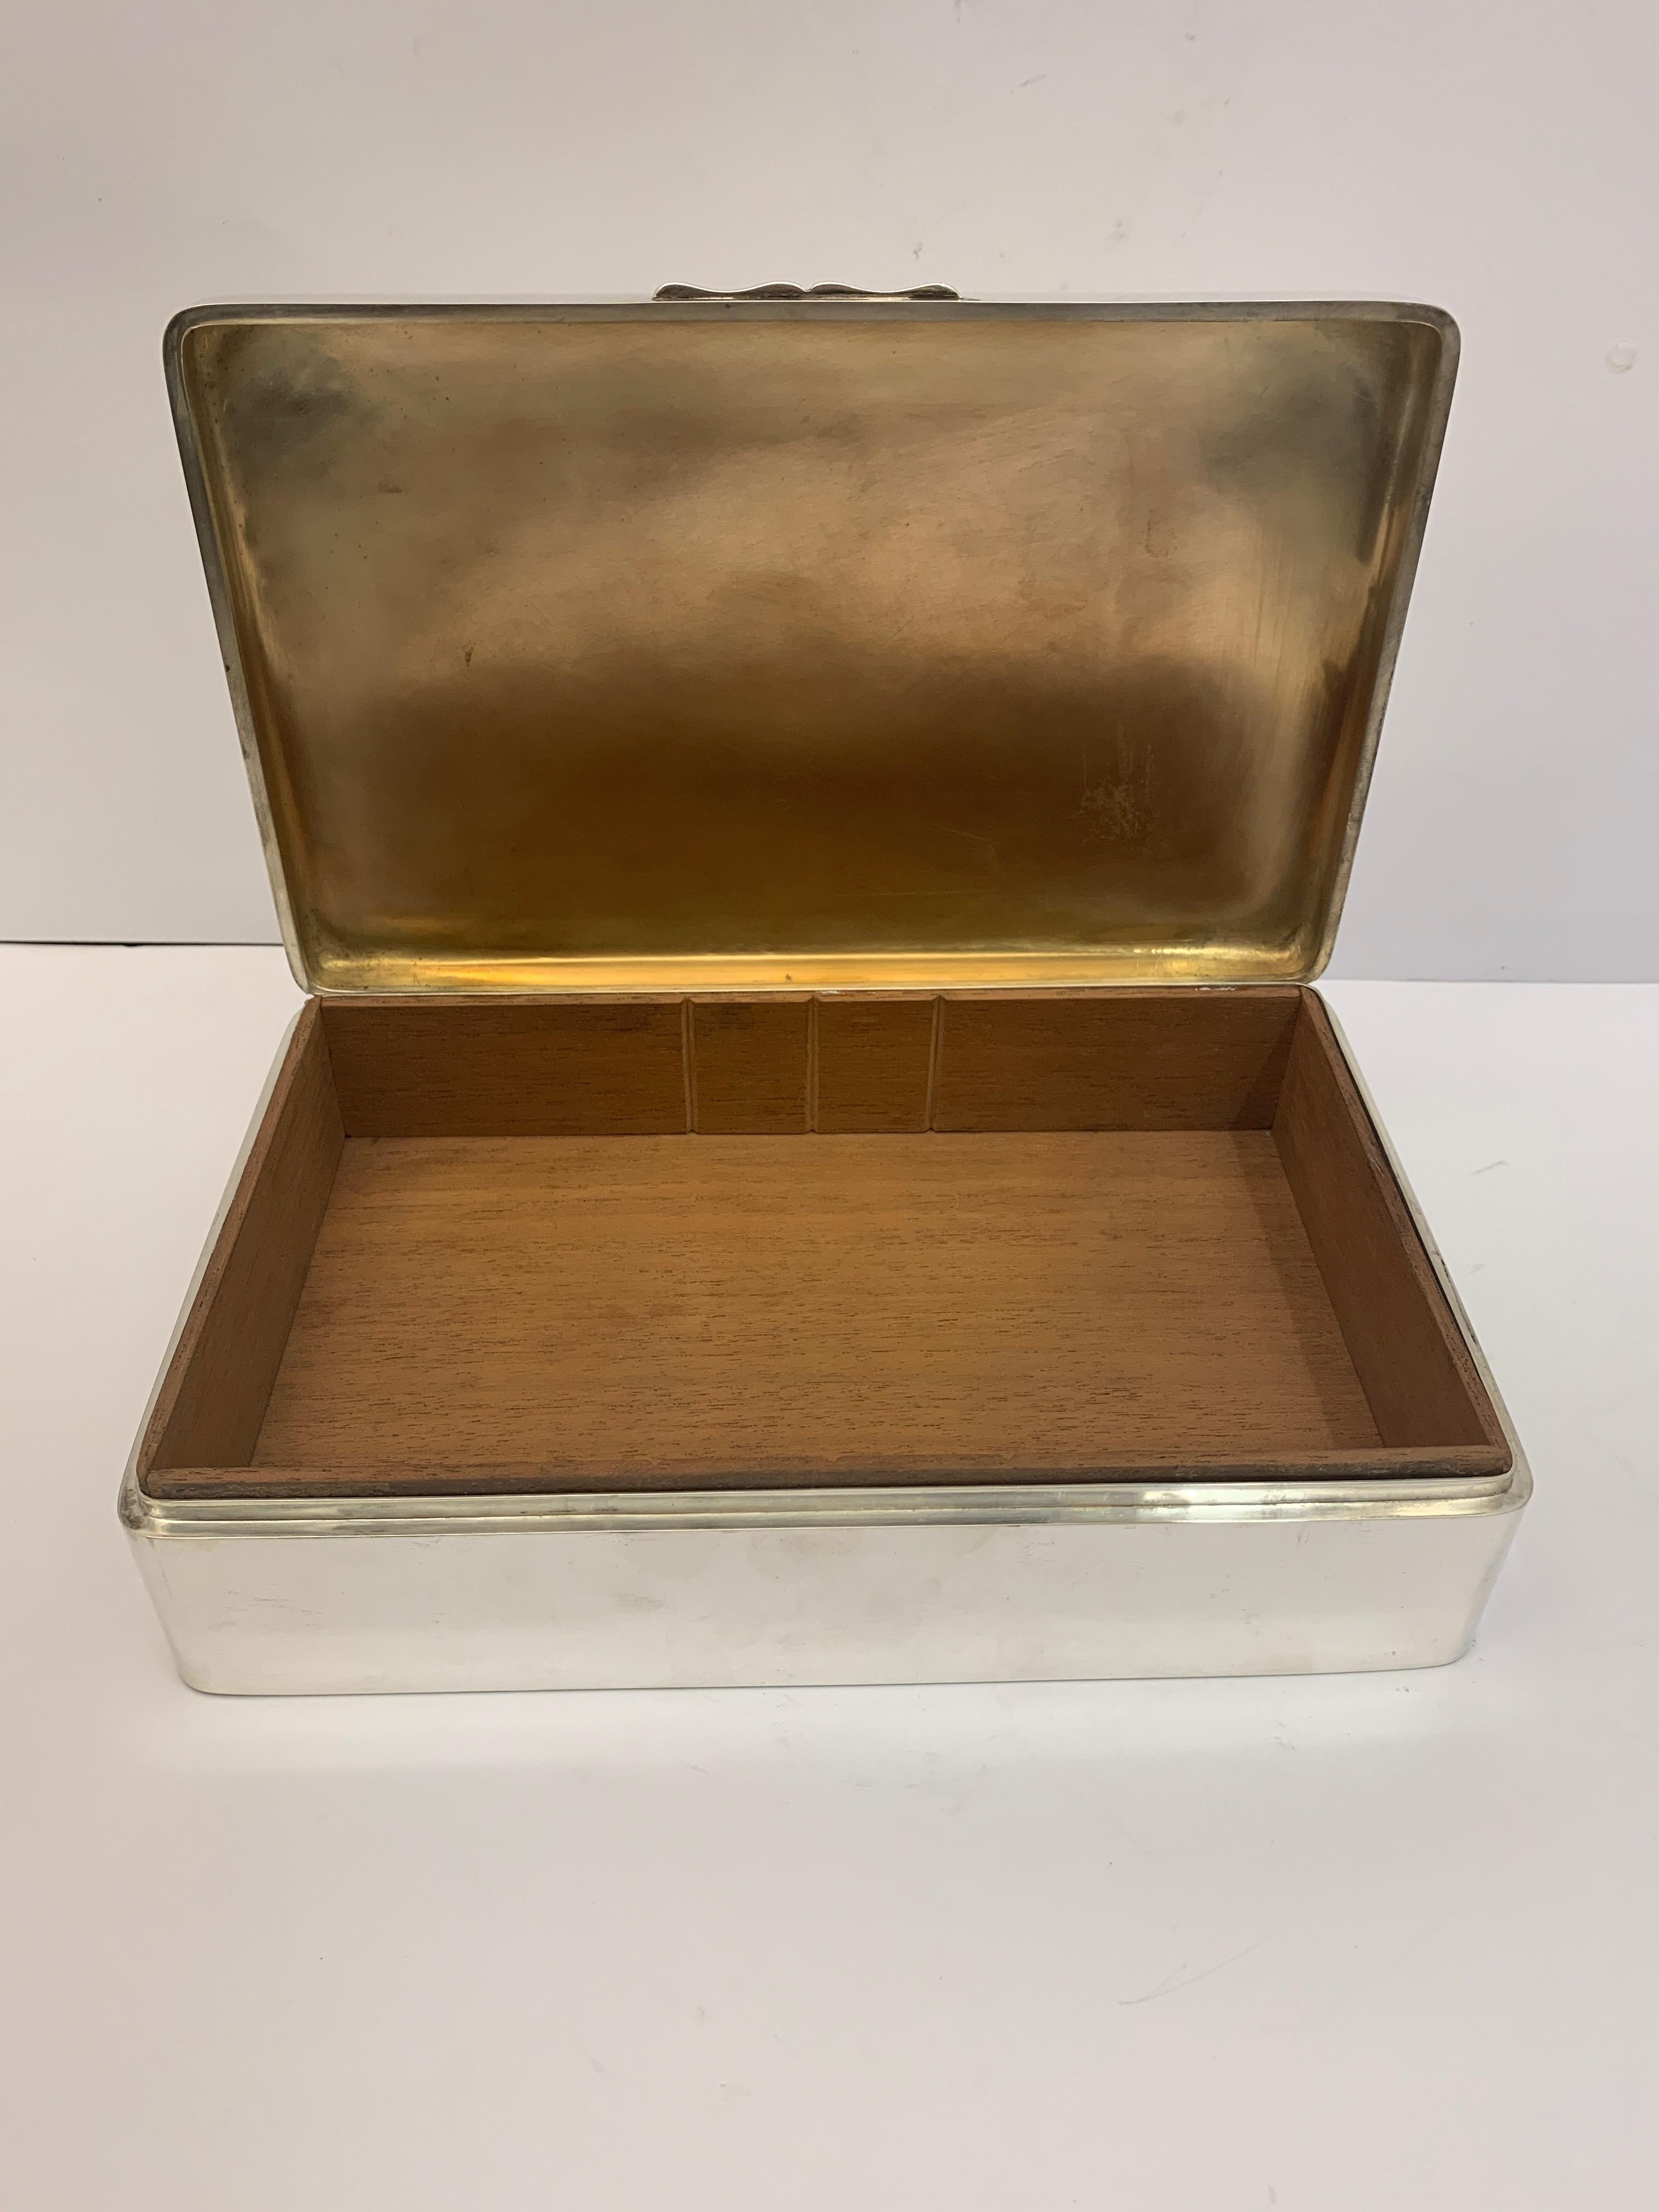 Silver Box by Zimmerman In Good Condition For Sale In London, London